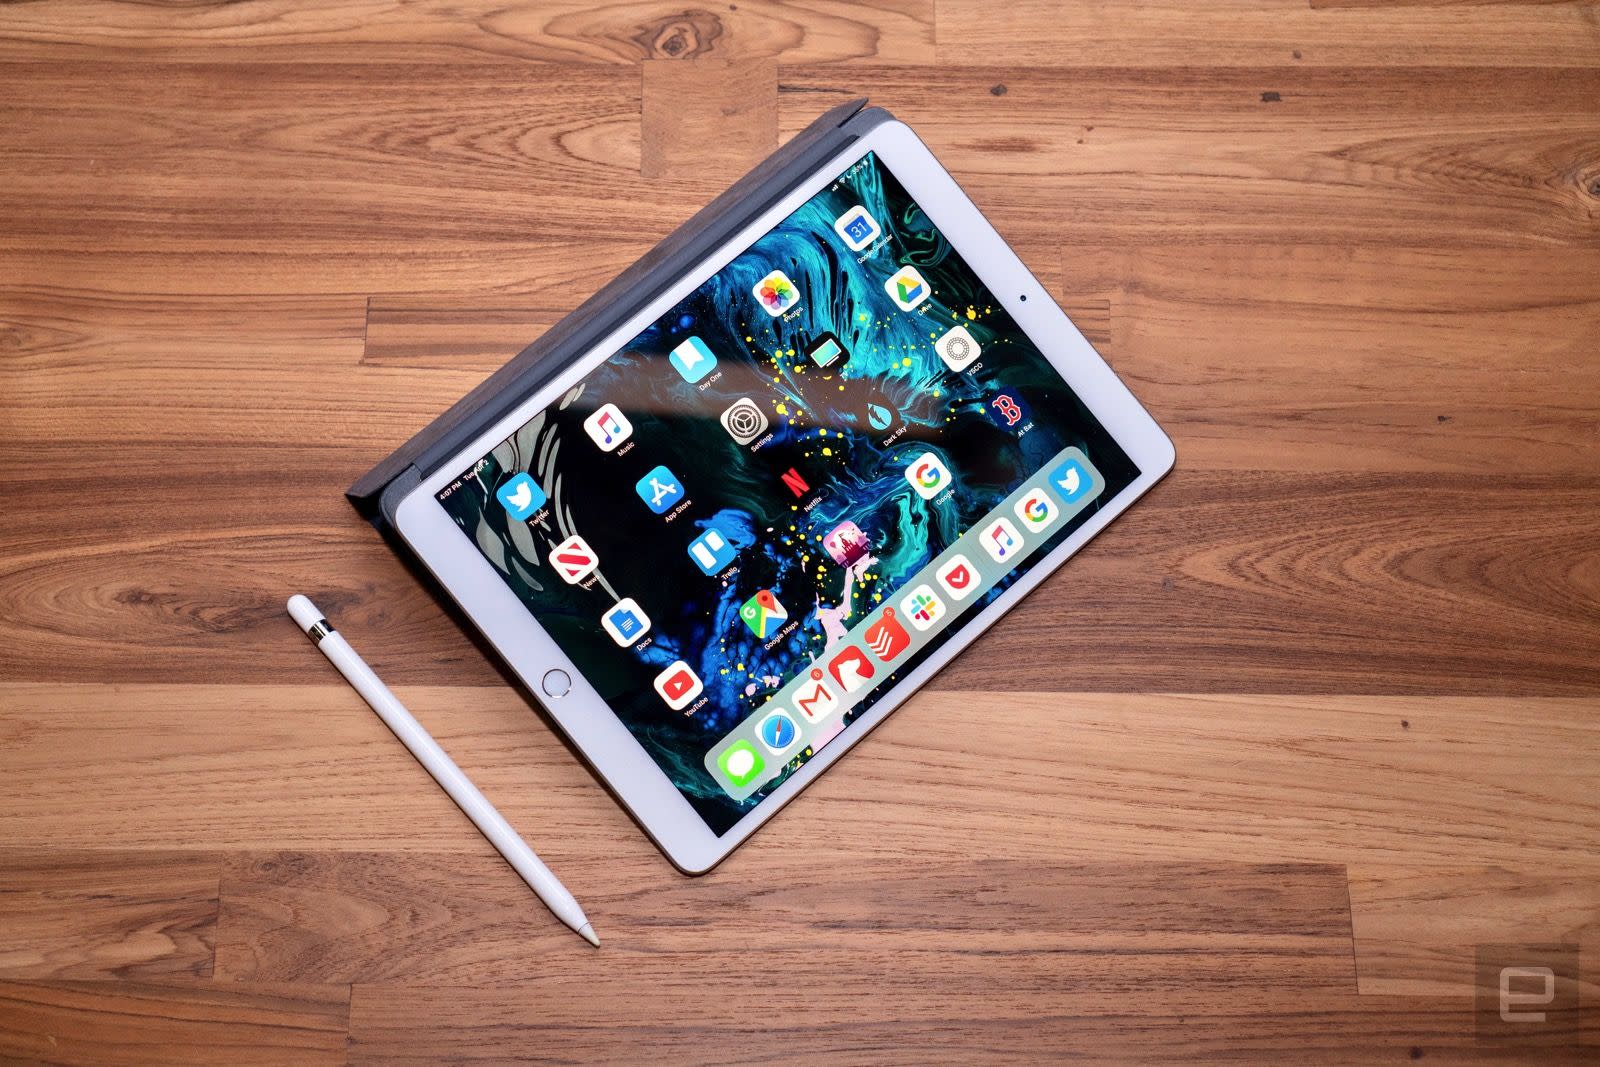 Apple's 256GB iPad Air is on sale for $549